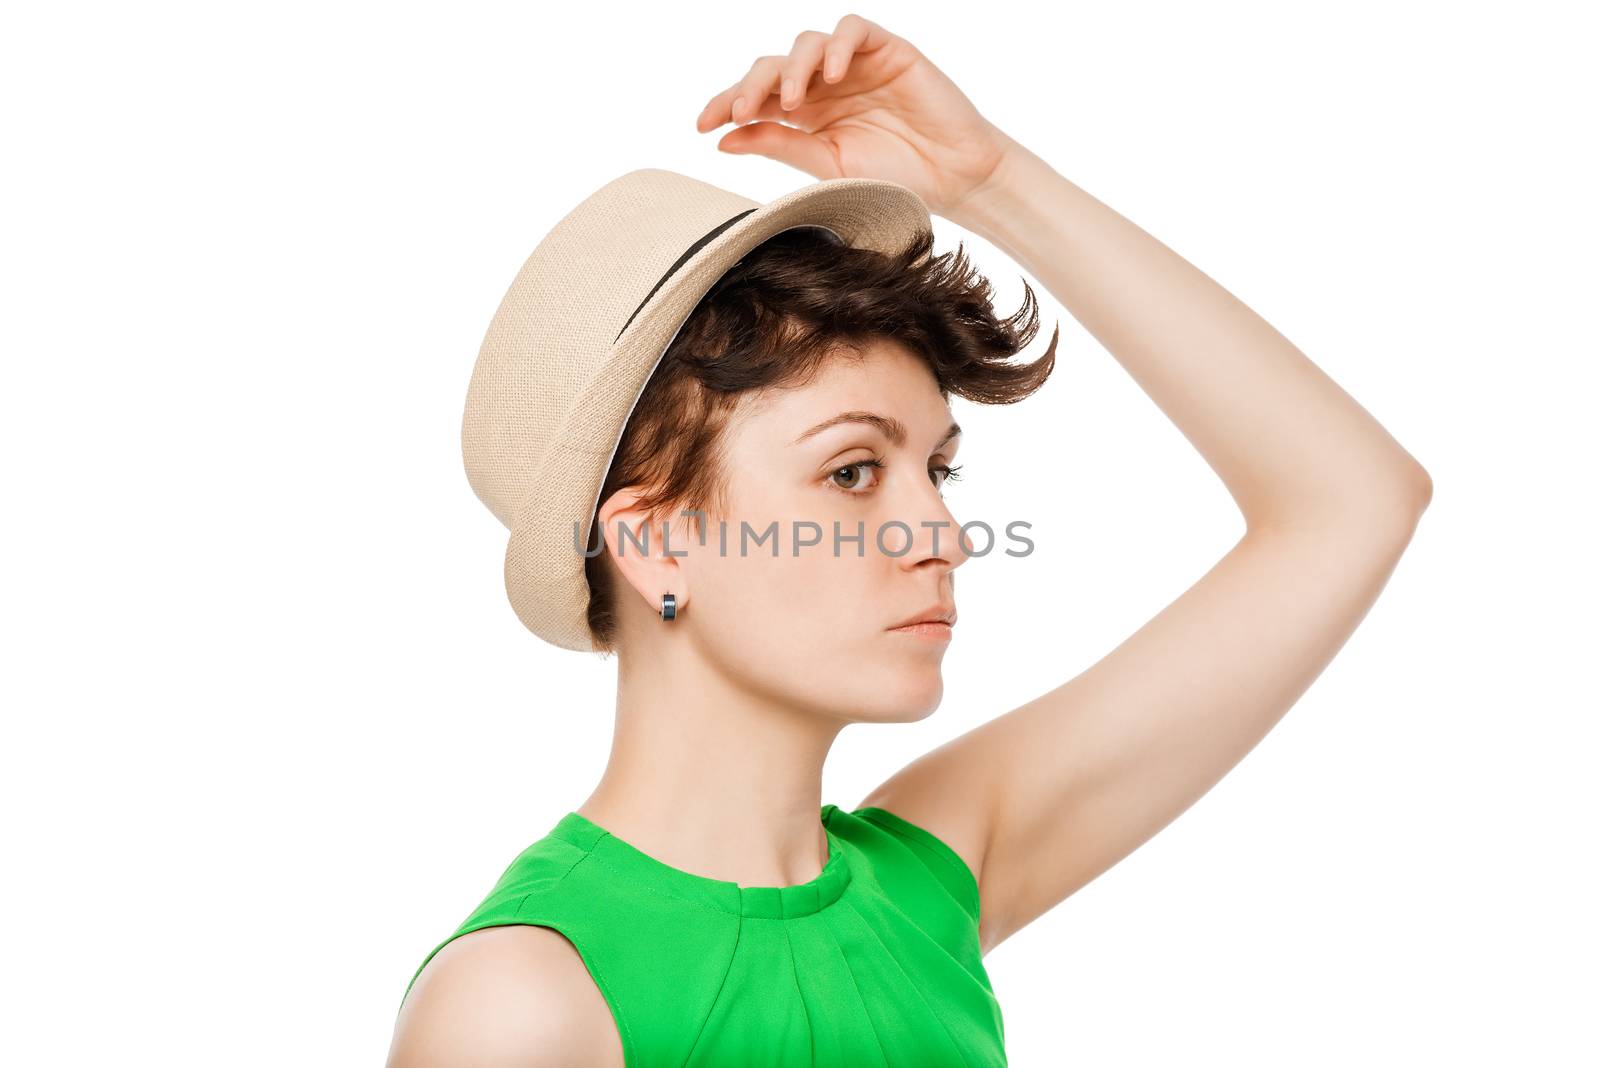 hand woman straightens his hat on his head on a white background portrait